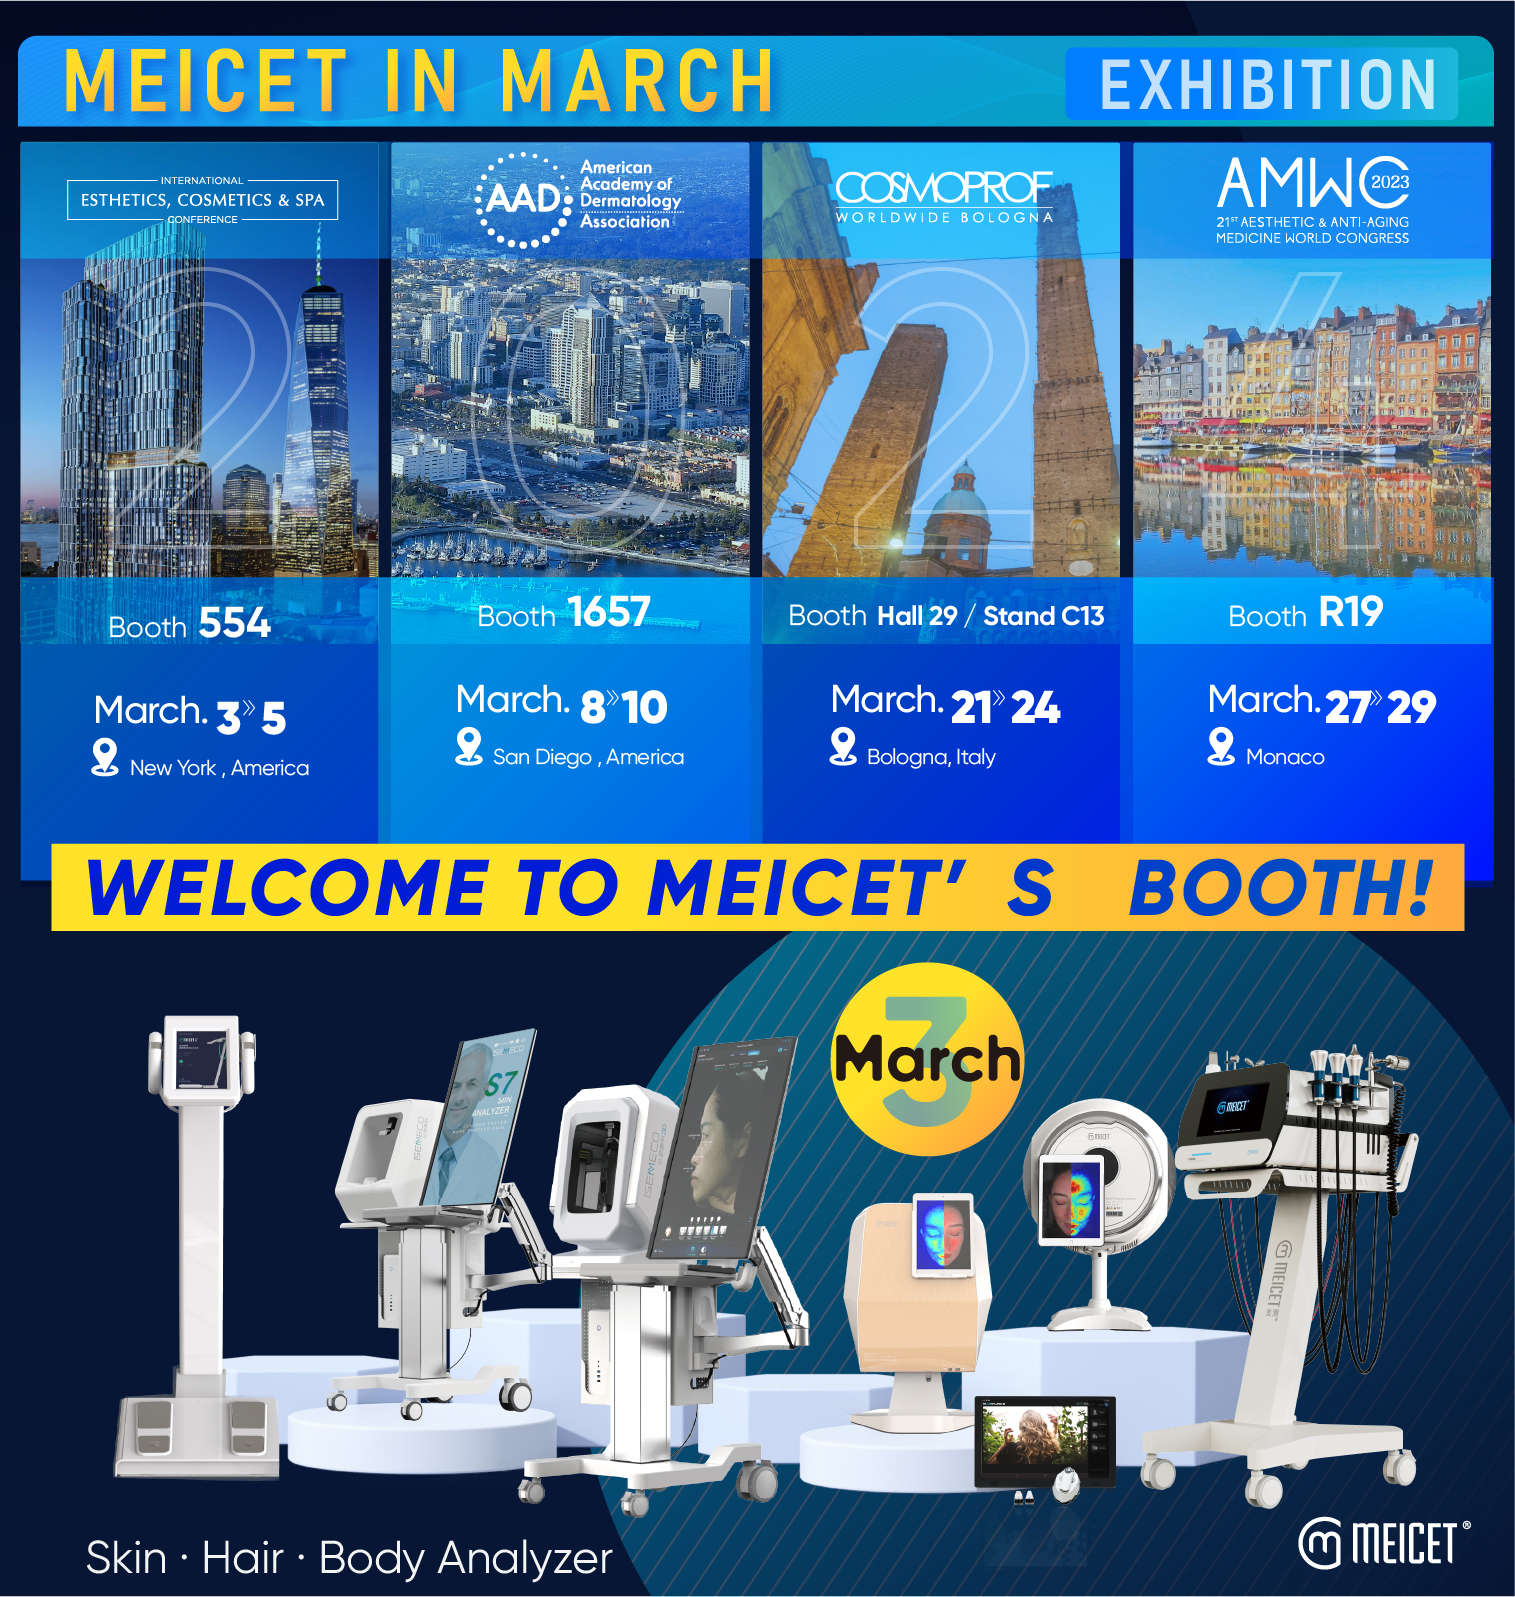 March Exhibition Invitations: A Showcase of Innovation in Skincare Technology and Analysis